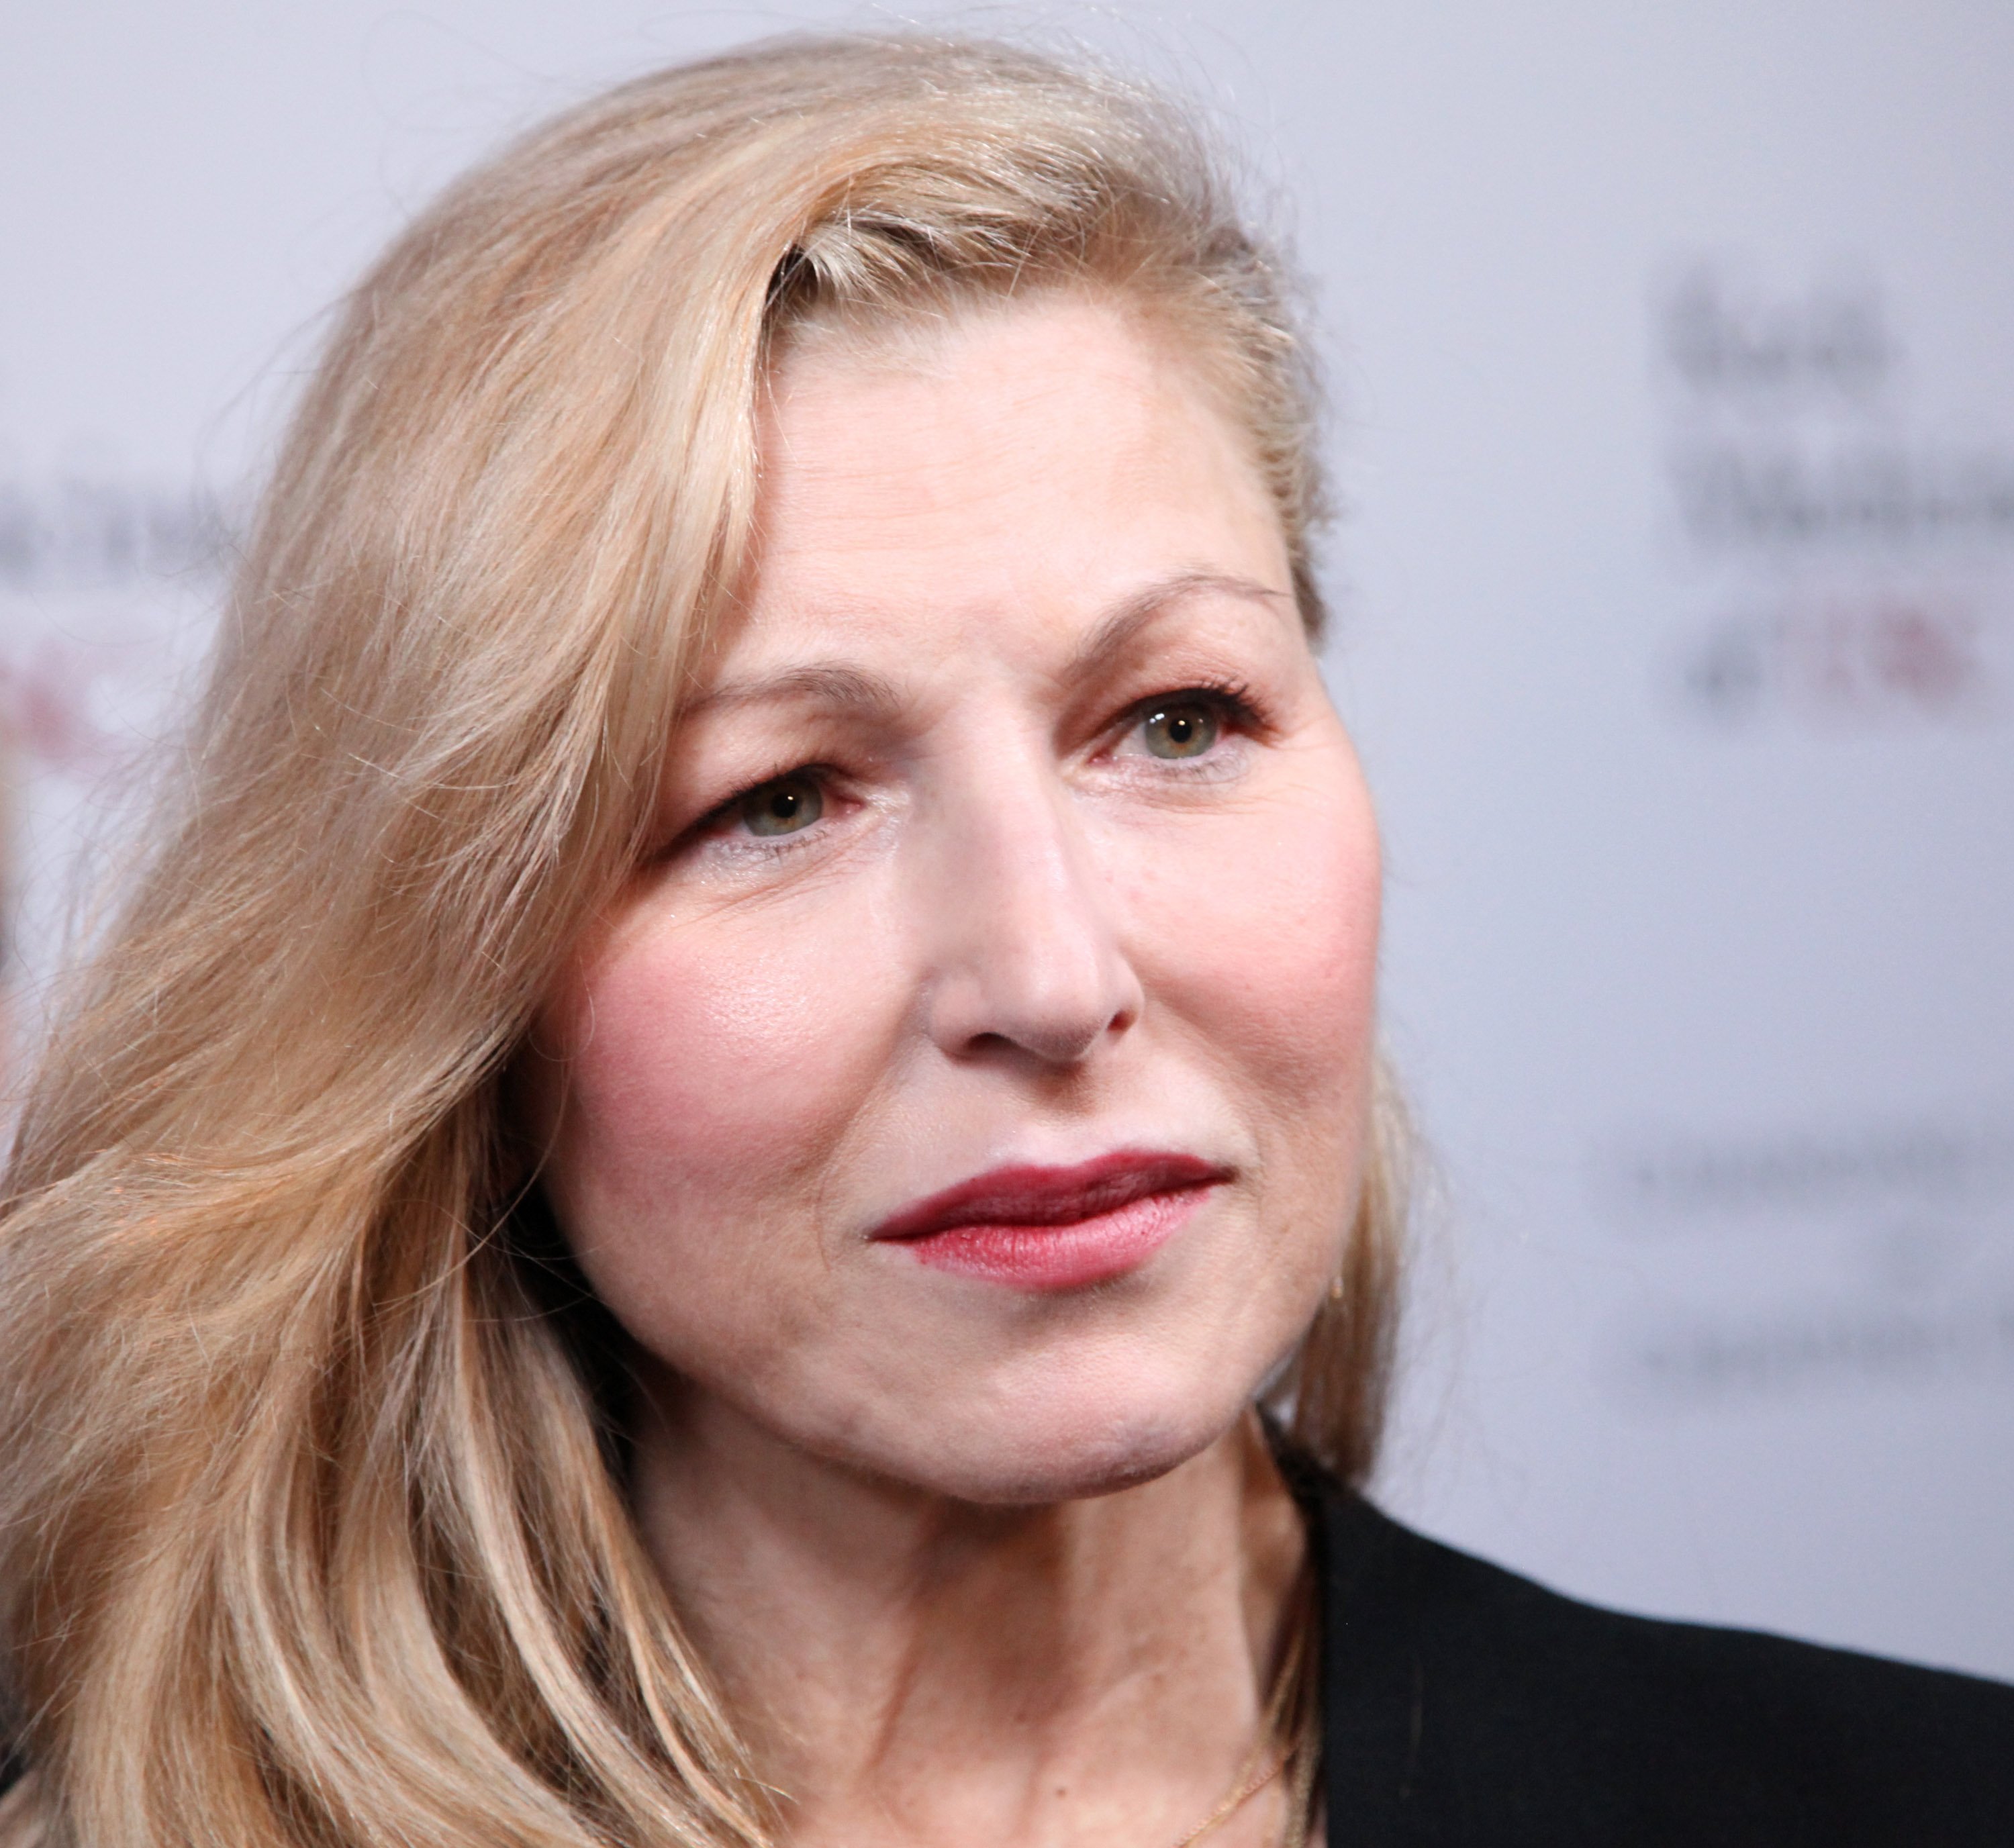 Tatum O'Neal im Beverly Wilshire Four Seasons Hotel am 20. November 2014 | Quelle: Getty Images